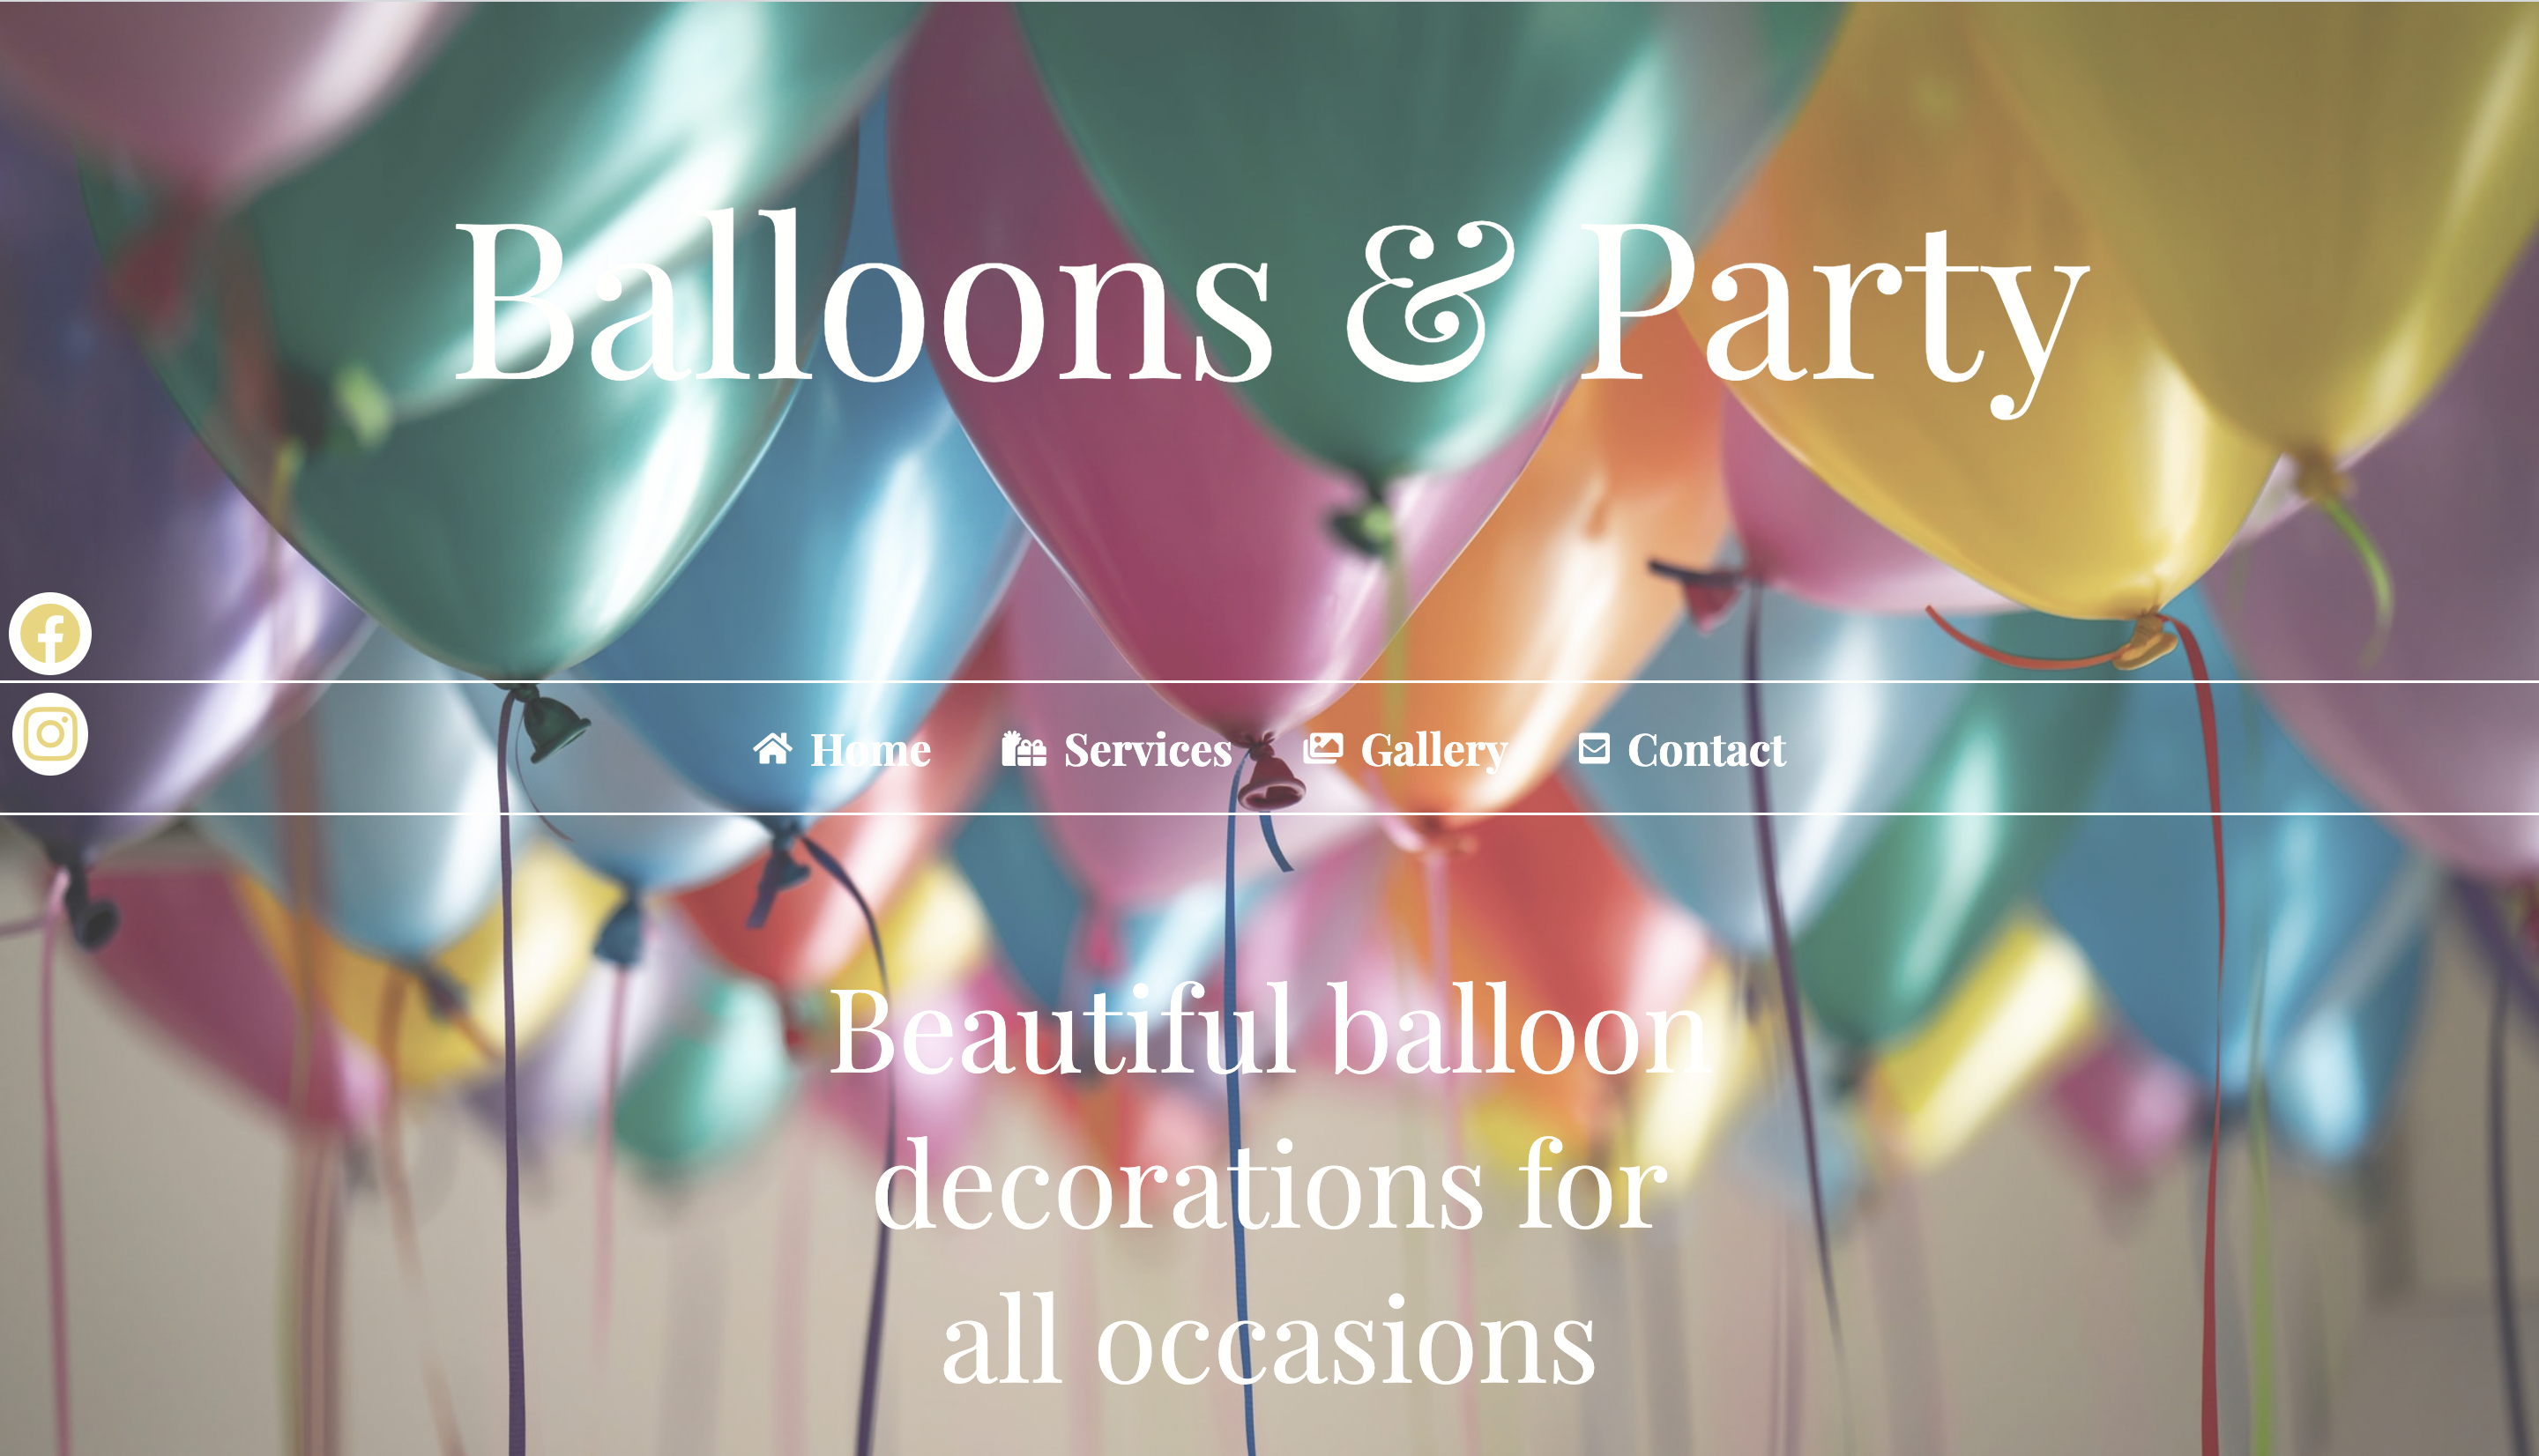 balloons & party website